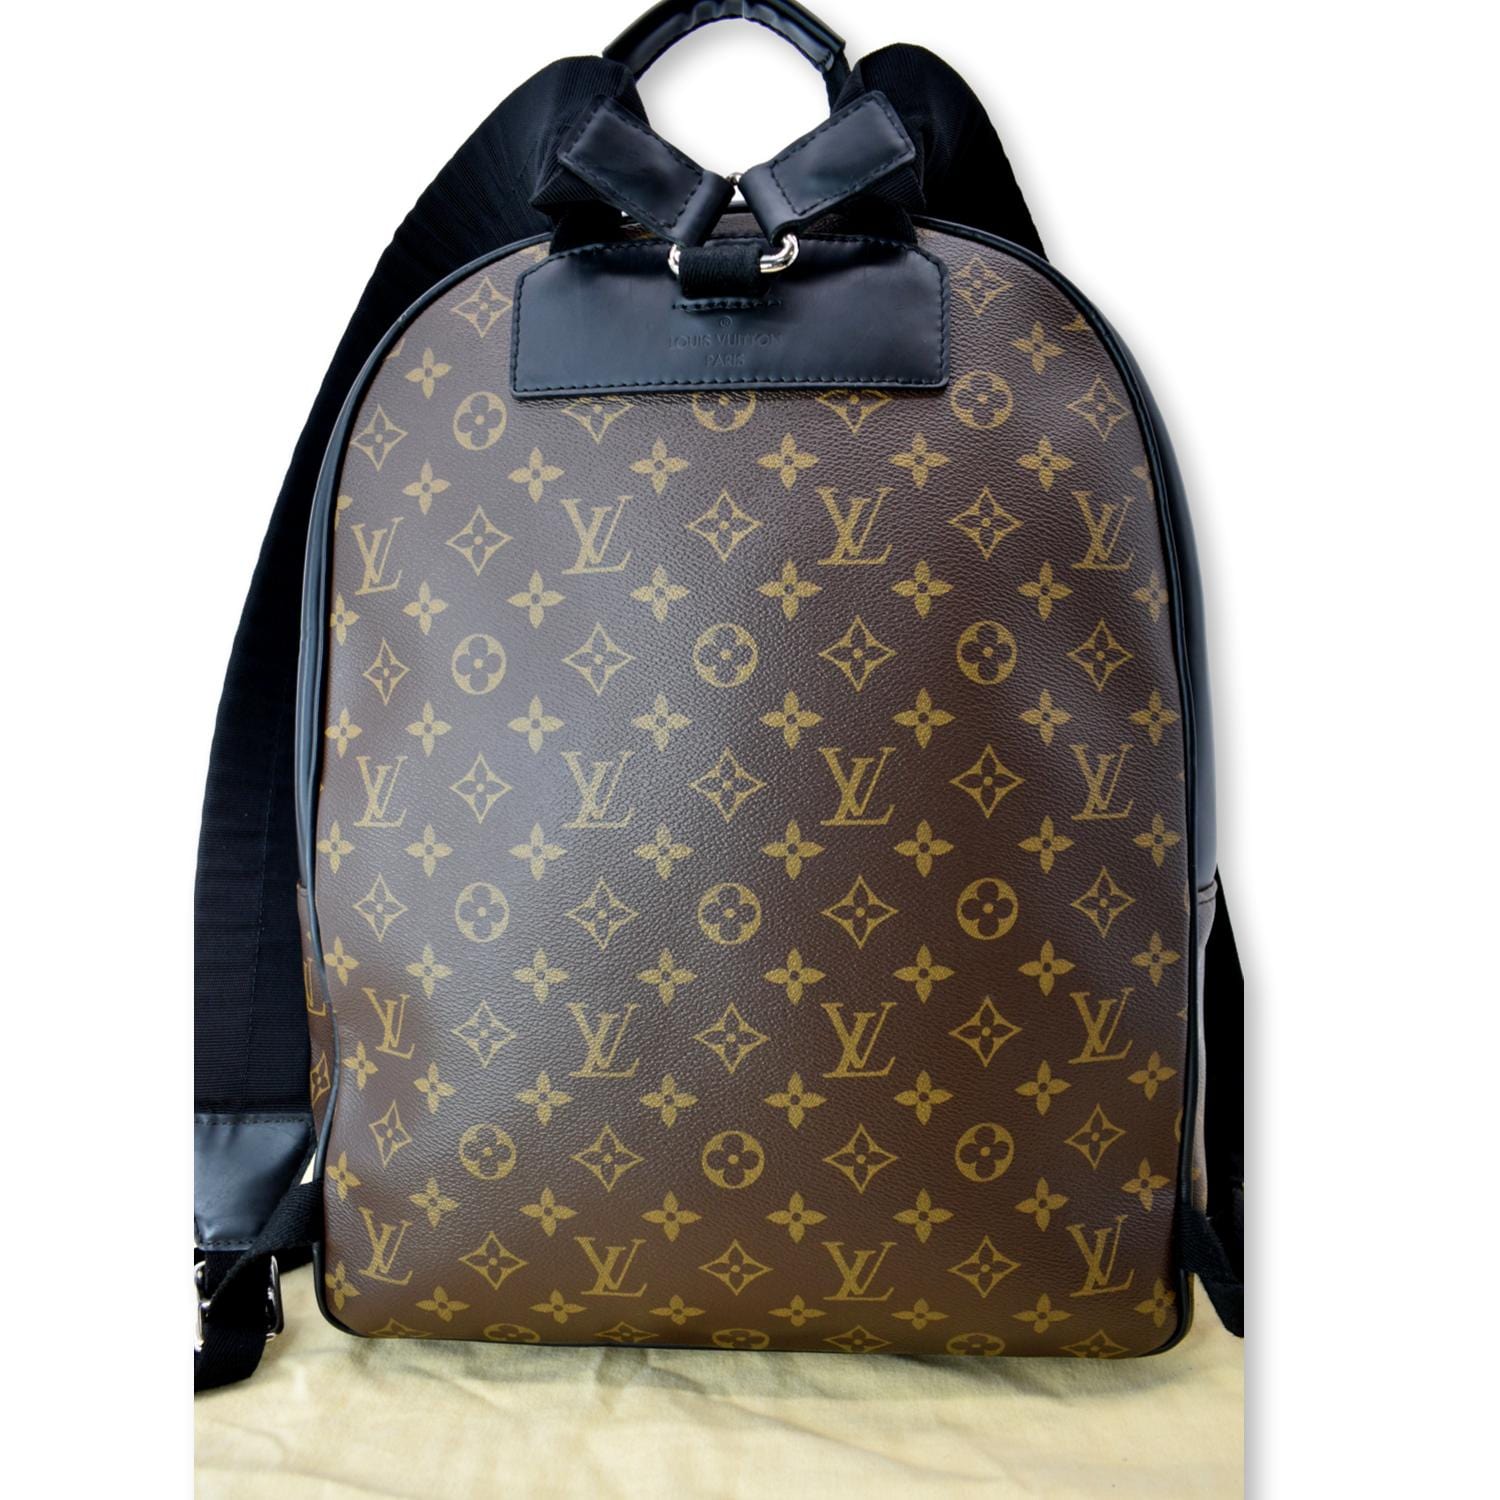 Satin Pillow Luxury Bag Shaper For Louis Vuitton Josh Backpack (Black) -  More colors available